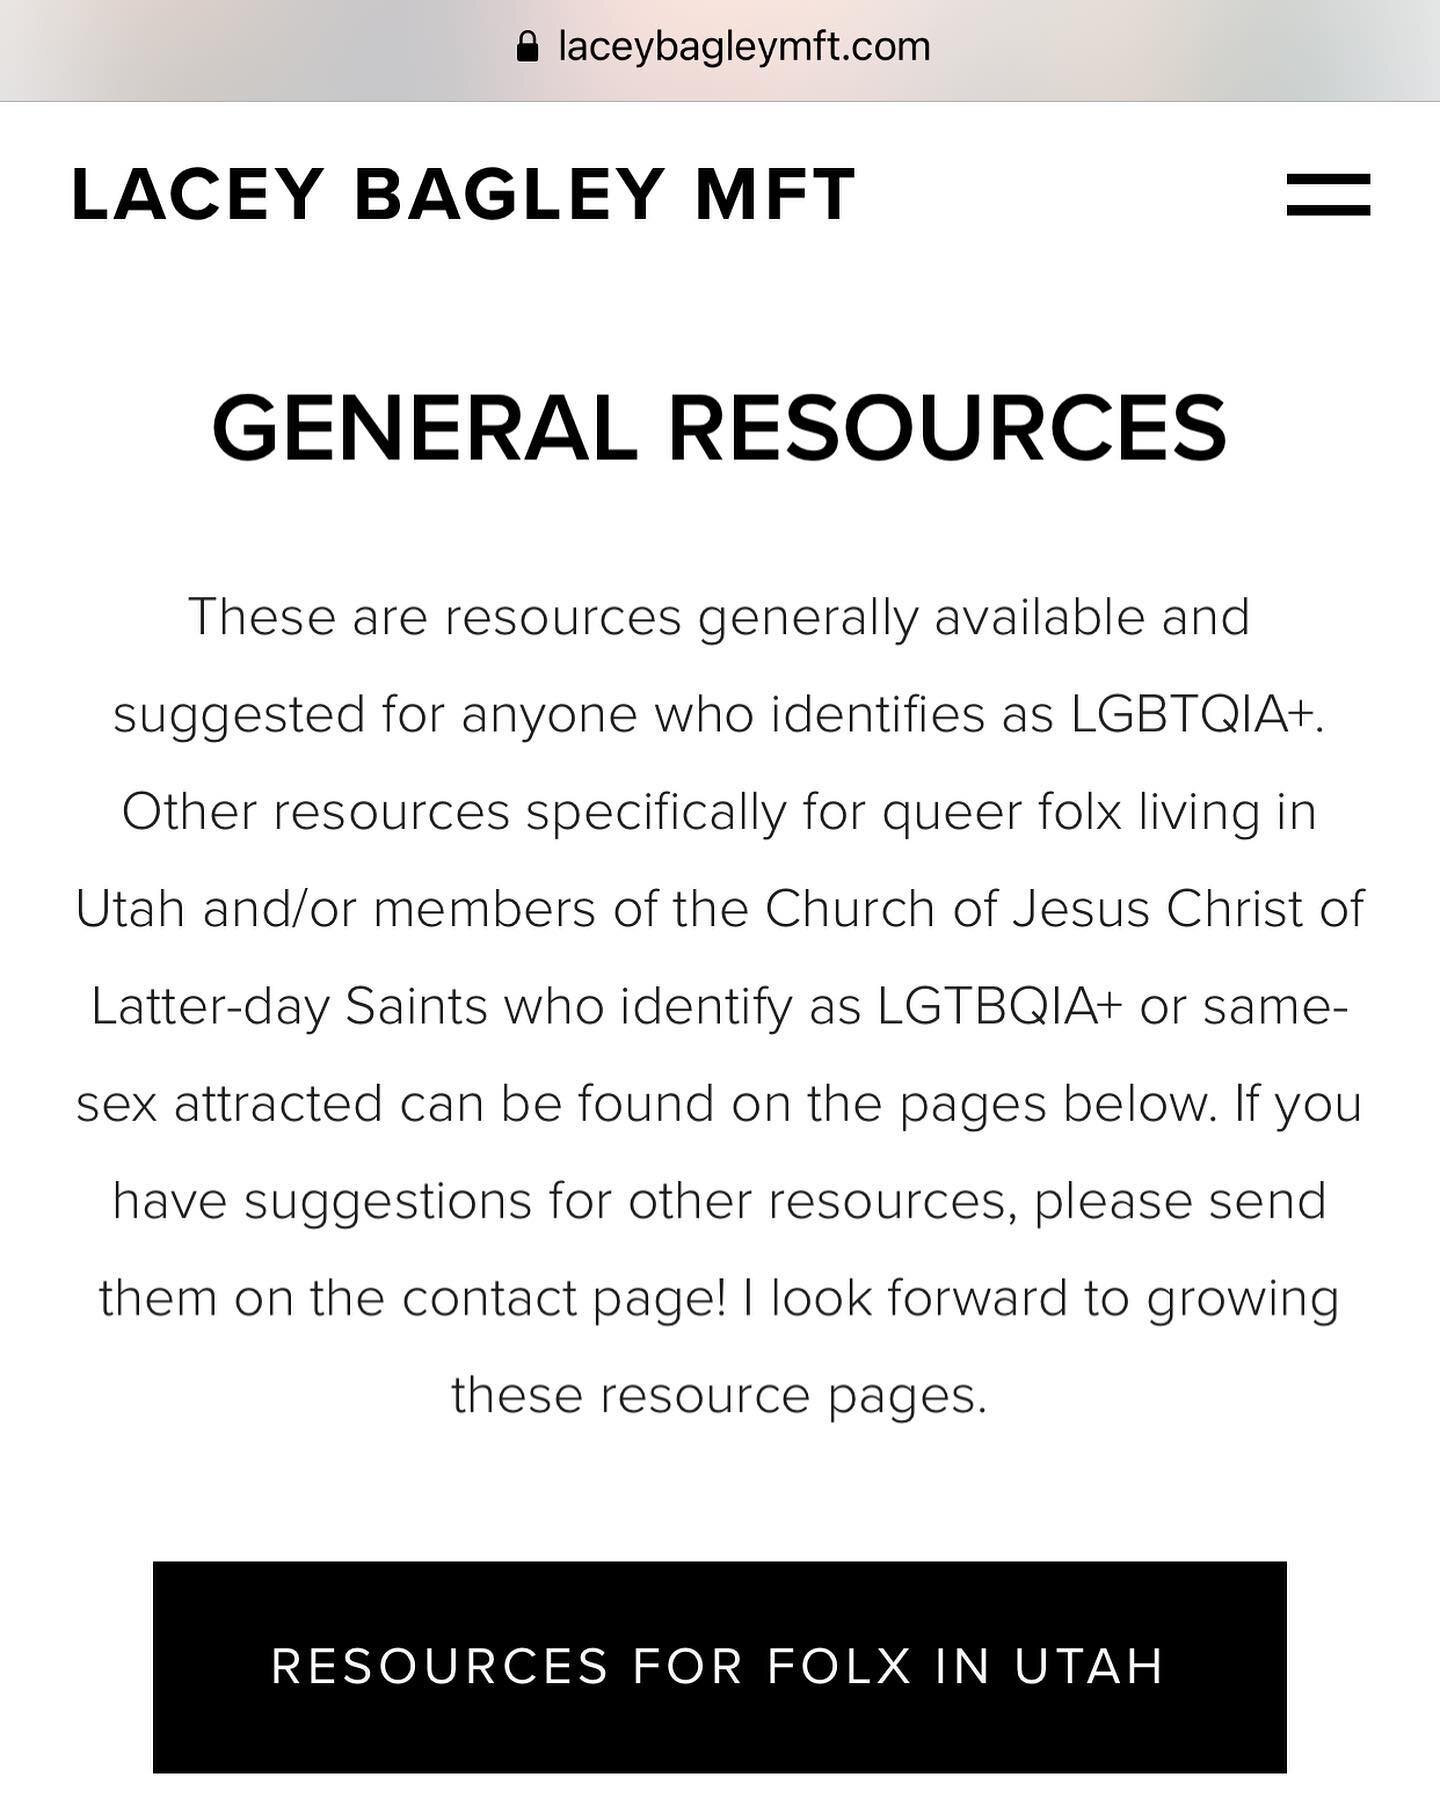 Update on the website! Please share resources you know of for LGBTQIA+ folx in Utah or just general resources. Thanks! 🏳️&zwj;🌈